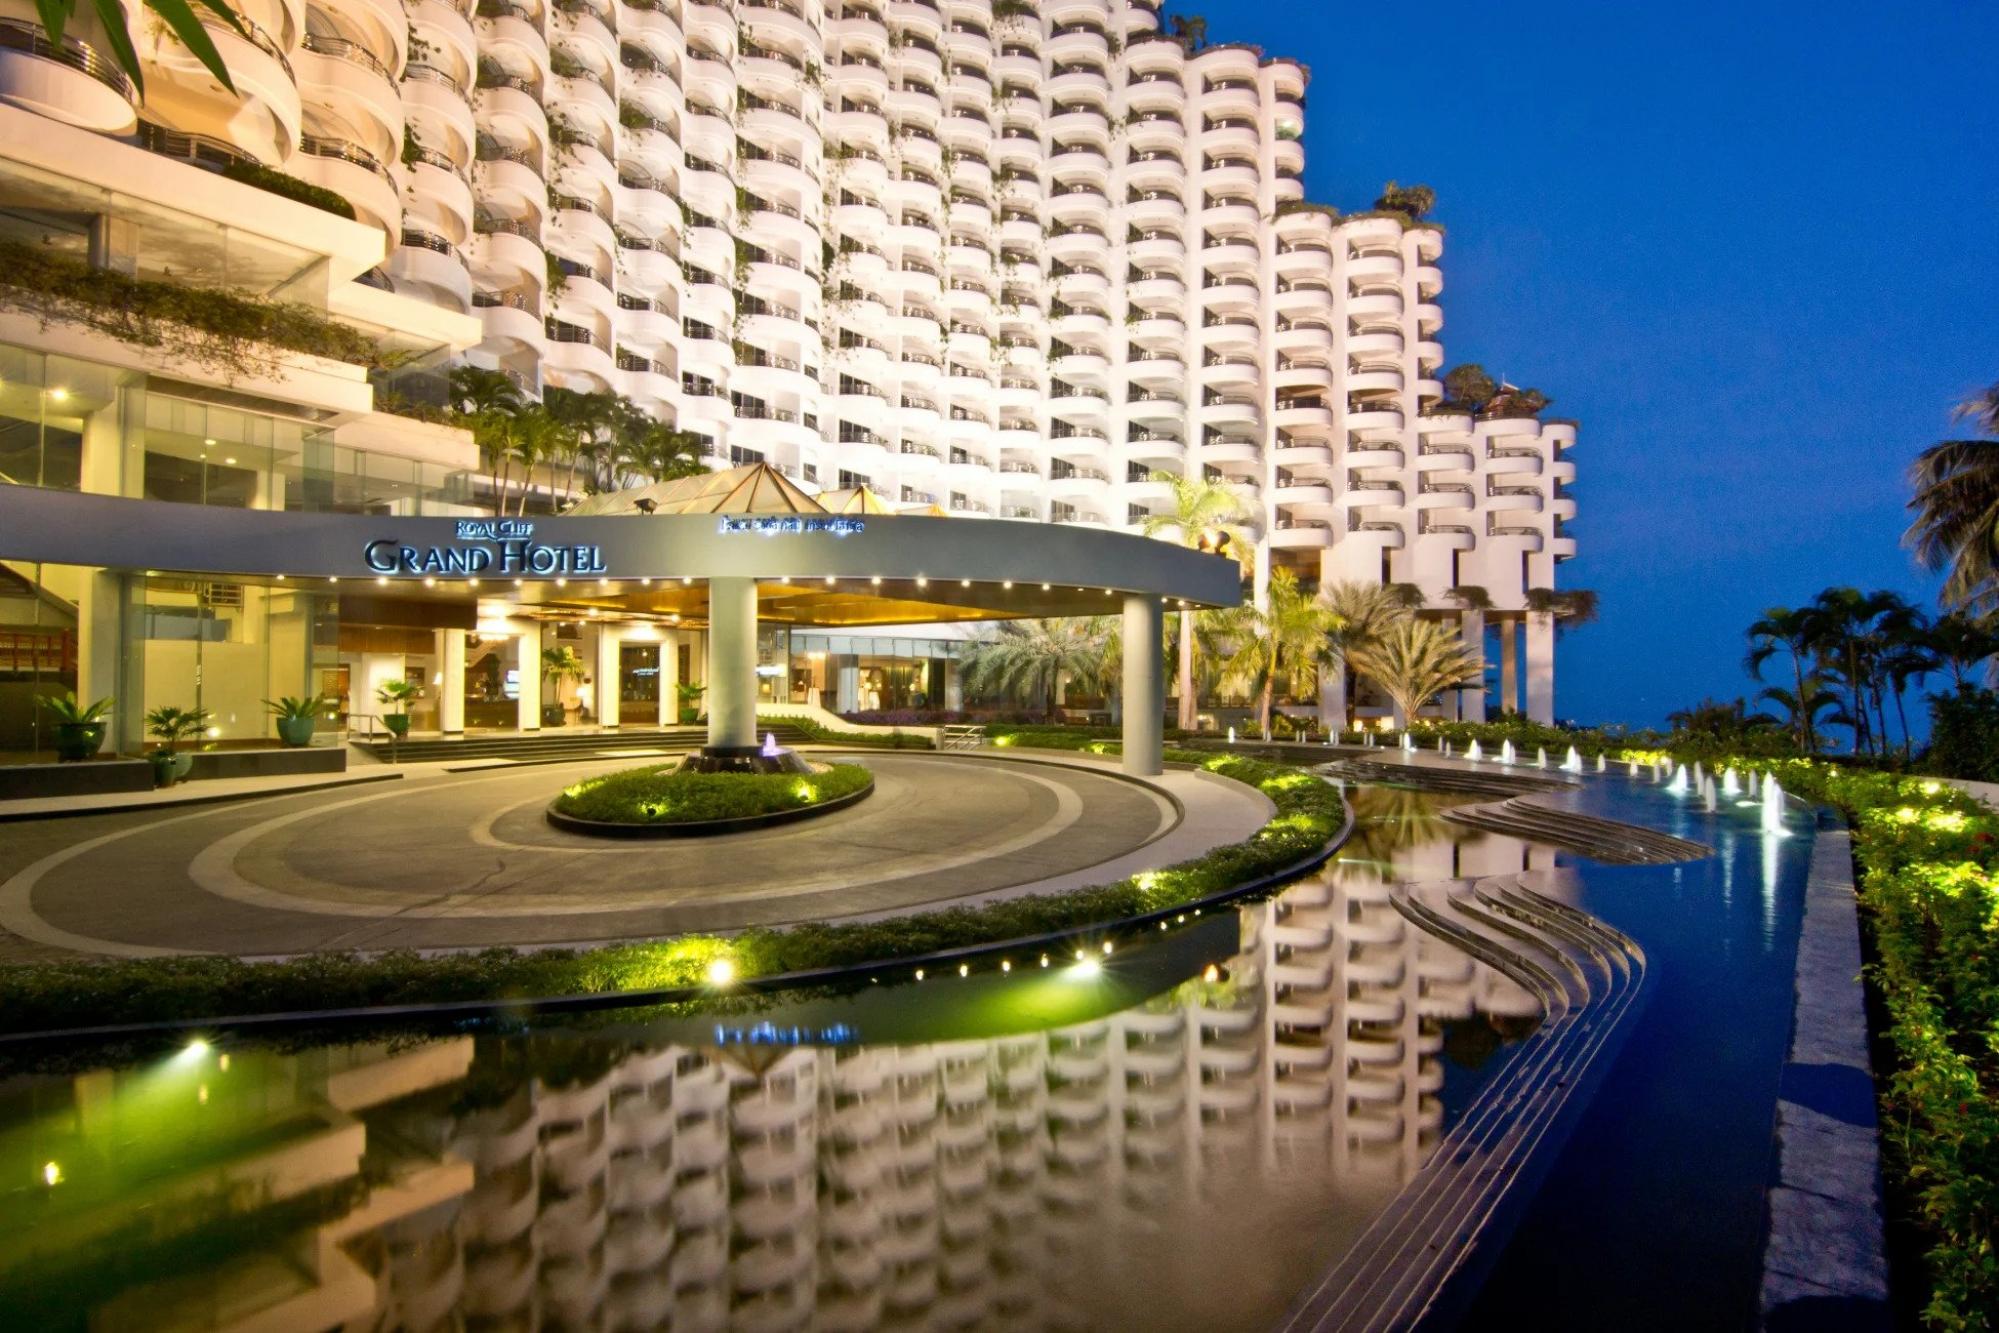 The Royal Cliff Beach Hotel's impressive hotel entrace situated in astounding Pattaya.